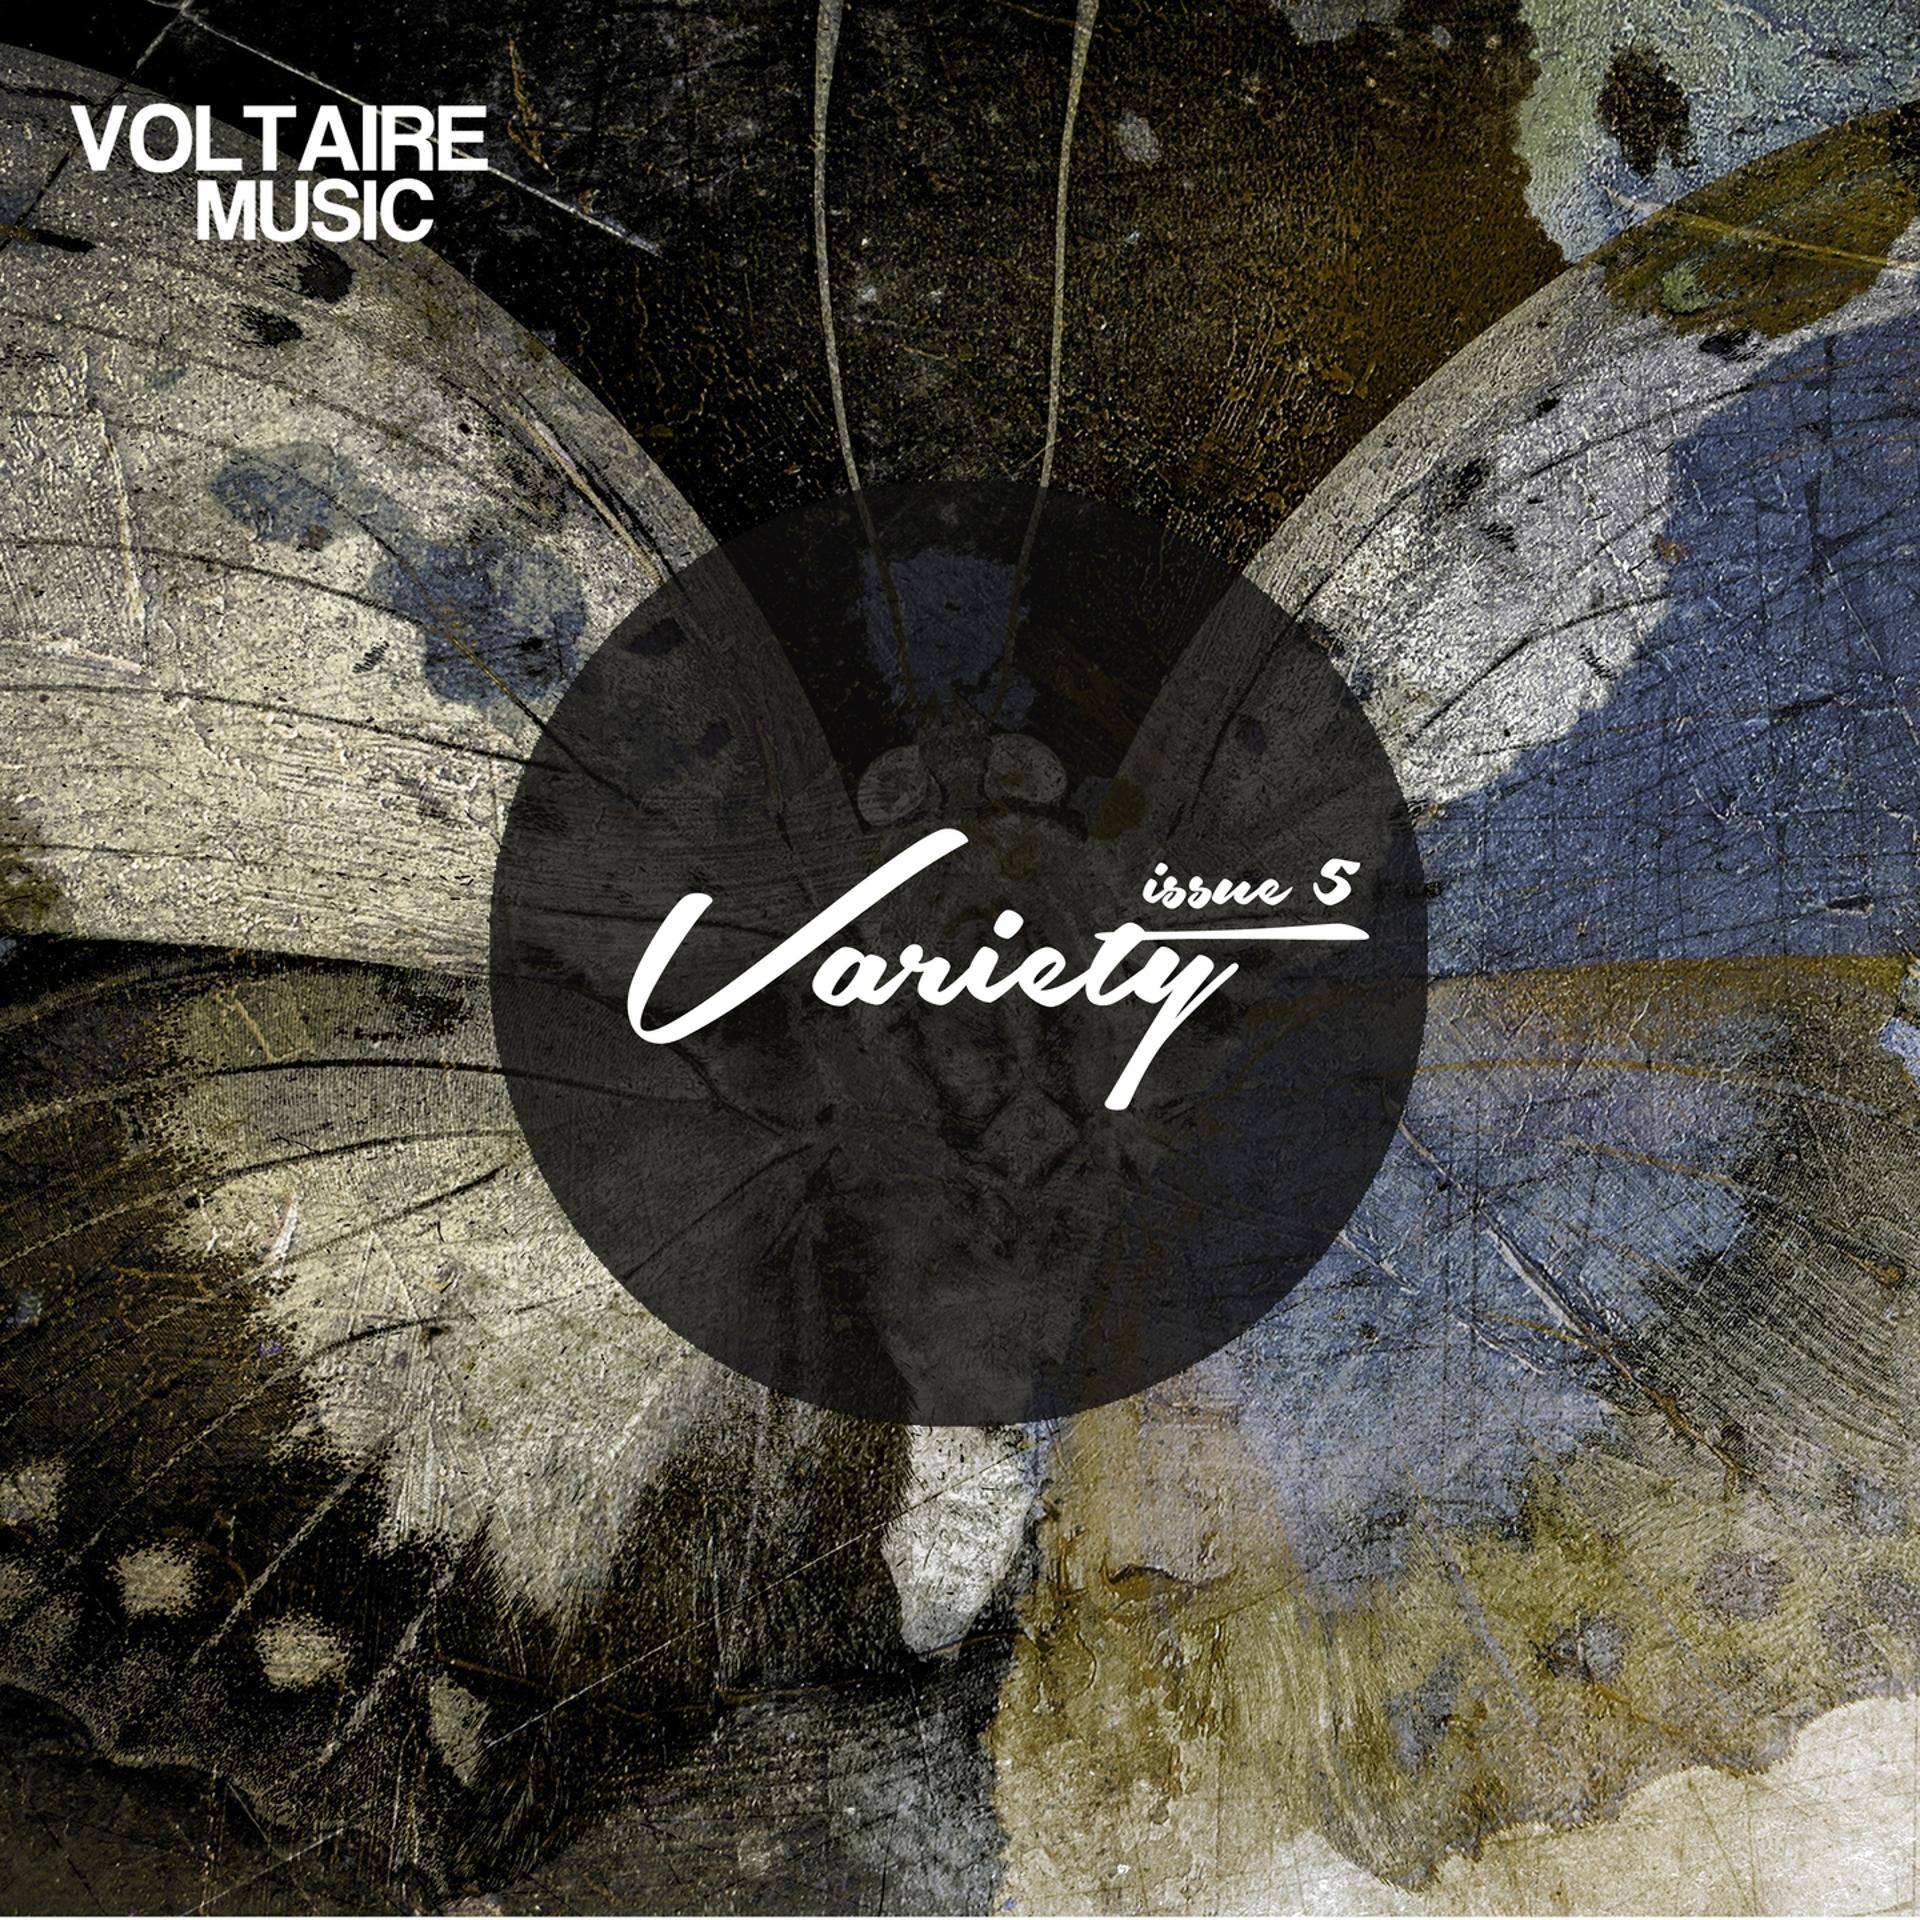 Постер альбома Voltaire Music Pres. Variety Issue 5